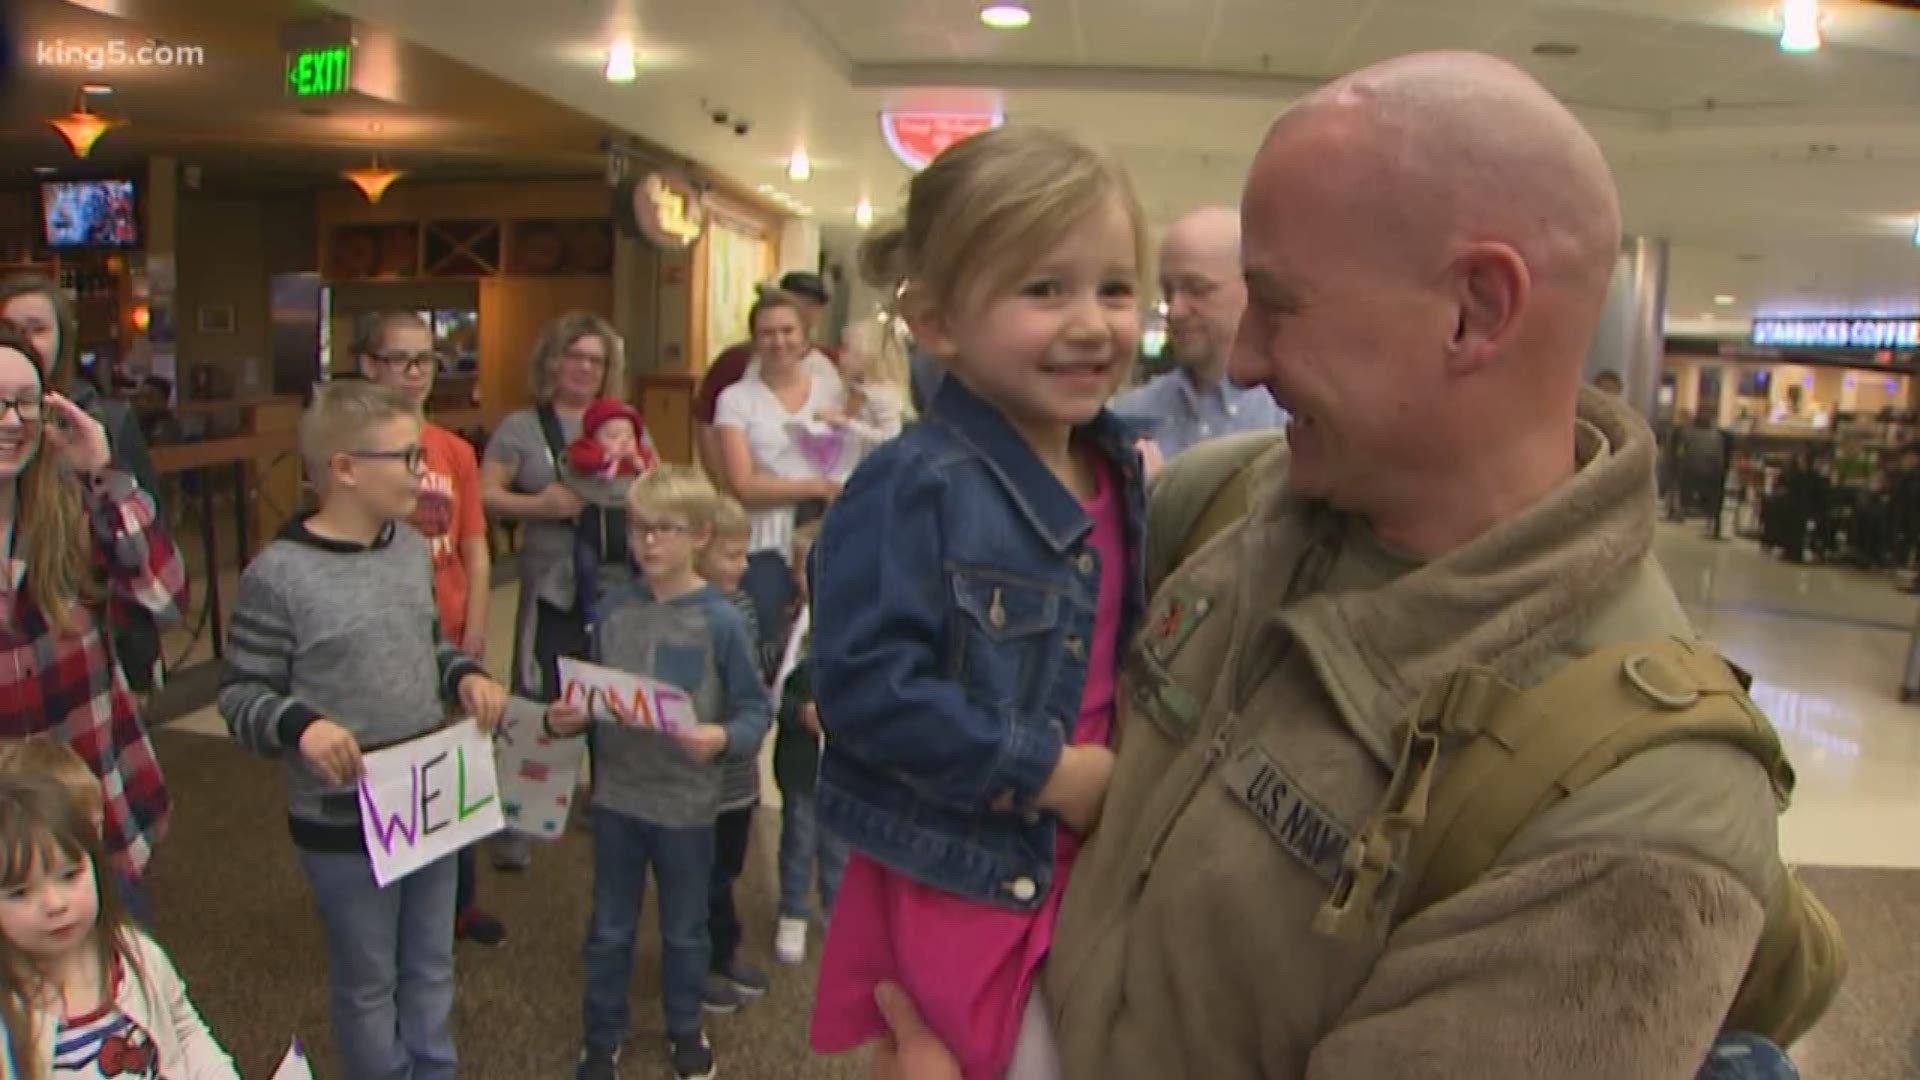 A crowd gathered to welcome home a reservist after 233 days deployed. KING 5's Dustin Gagne was there for the reunion at Sea-Tac Airport.